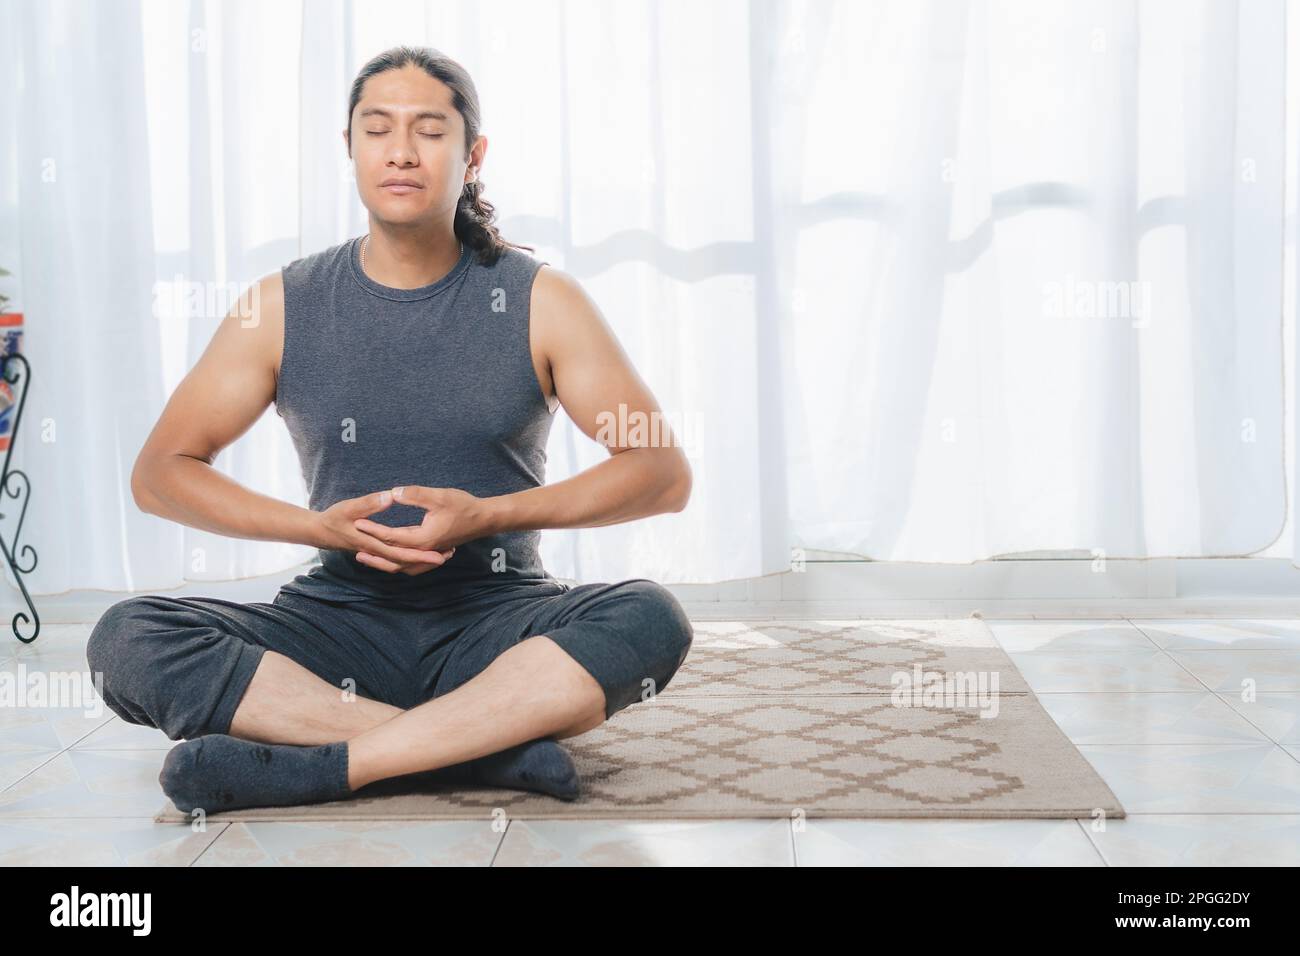 A man does Yoga indoors, a lot of sunlight comes in through the window, he does deep meditation postures. It is very quiet. Stock Photo